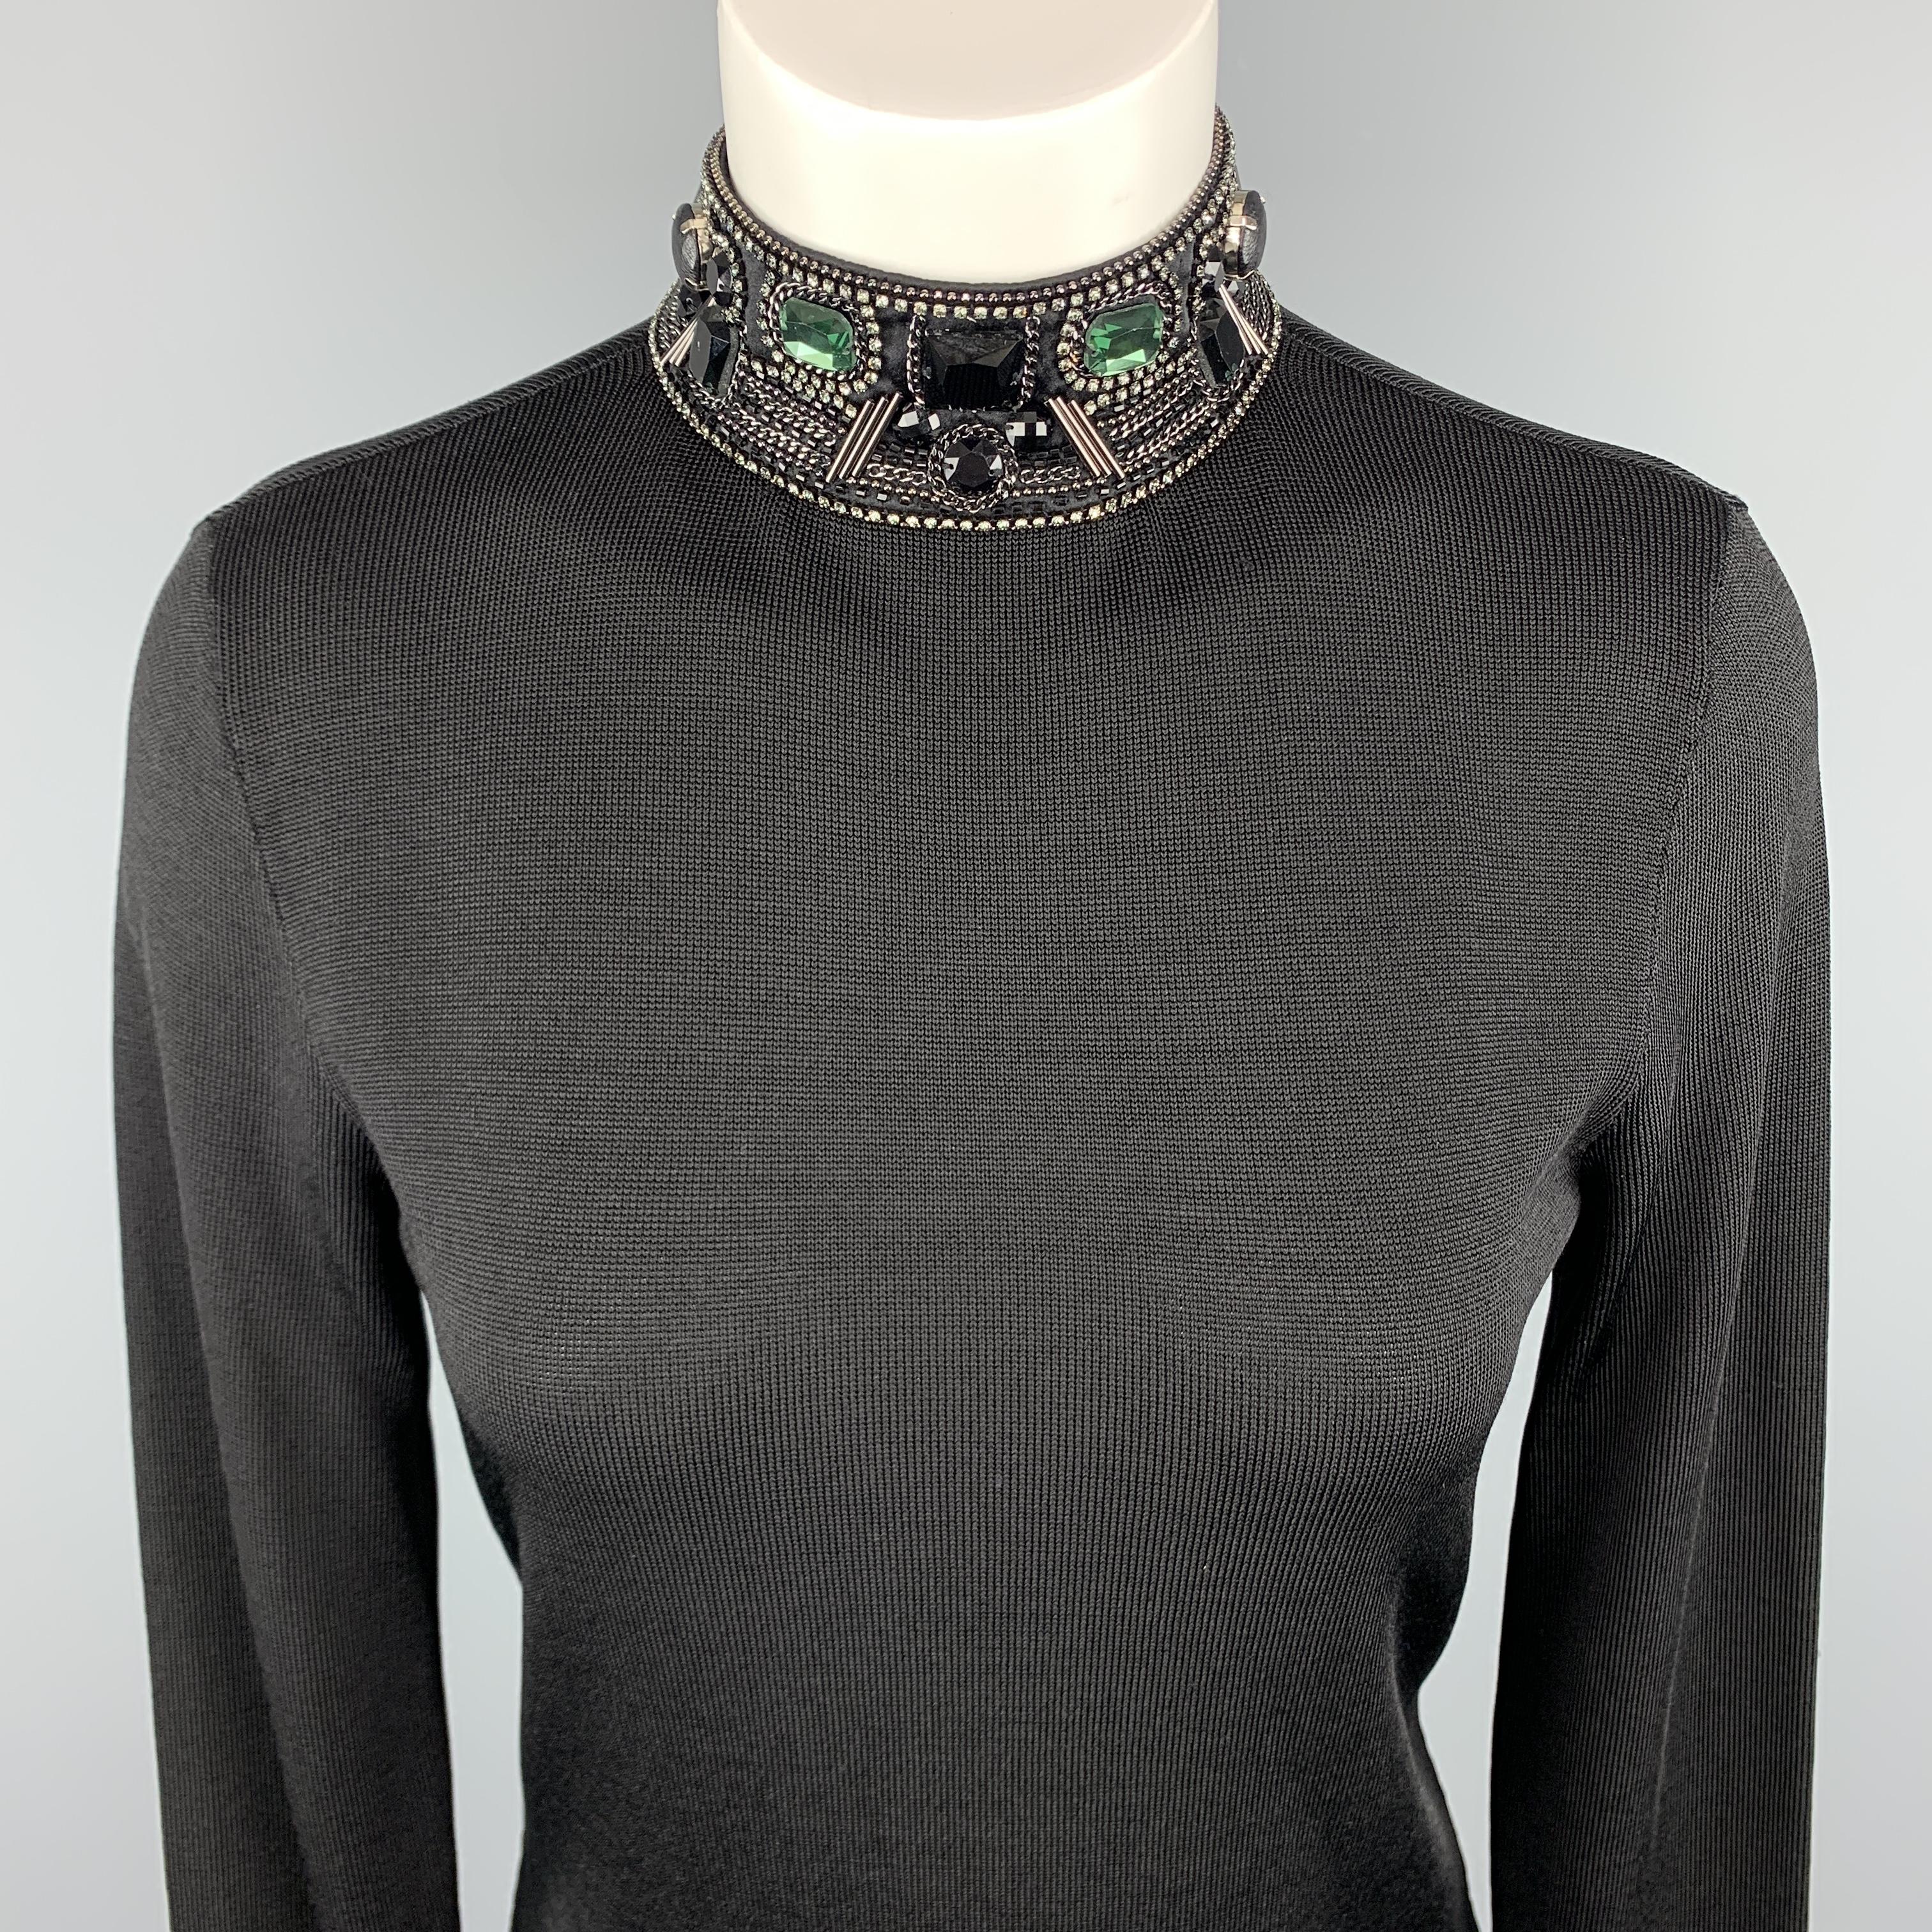 BLACK LABEL by RALPH LAUREN Dress Top comes in a black tone in a solid viscose /silk material, with a mock turtleneck, rhinestone, a open back detail and long sleeves.
 
Excellent Pre-Owned Condition.
Marked: M
 
Measurements:
 
Shoulder: 14.5